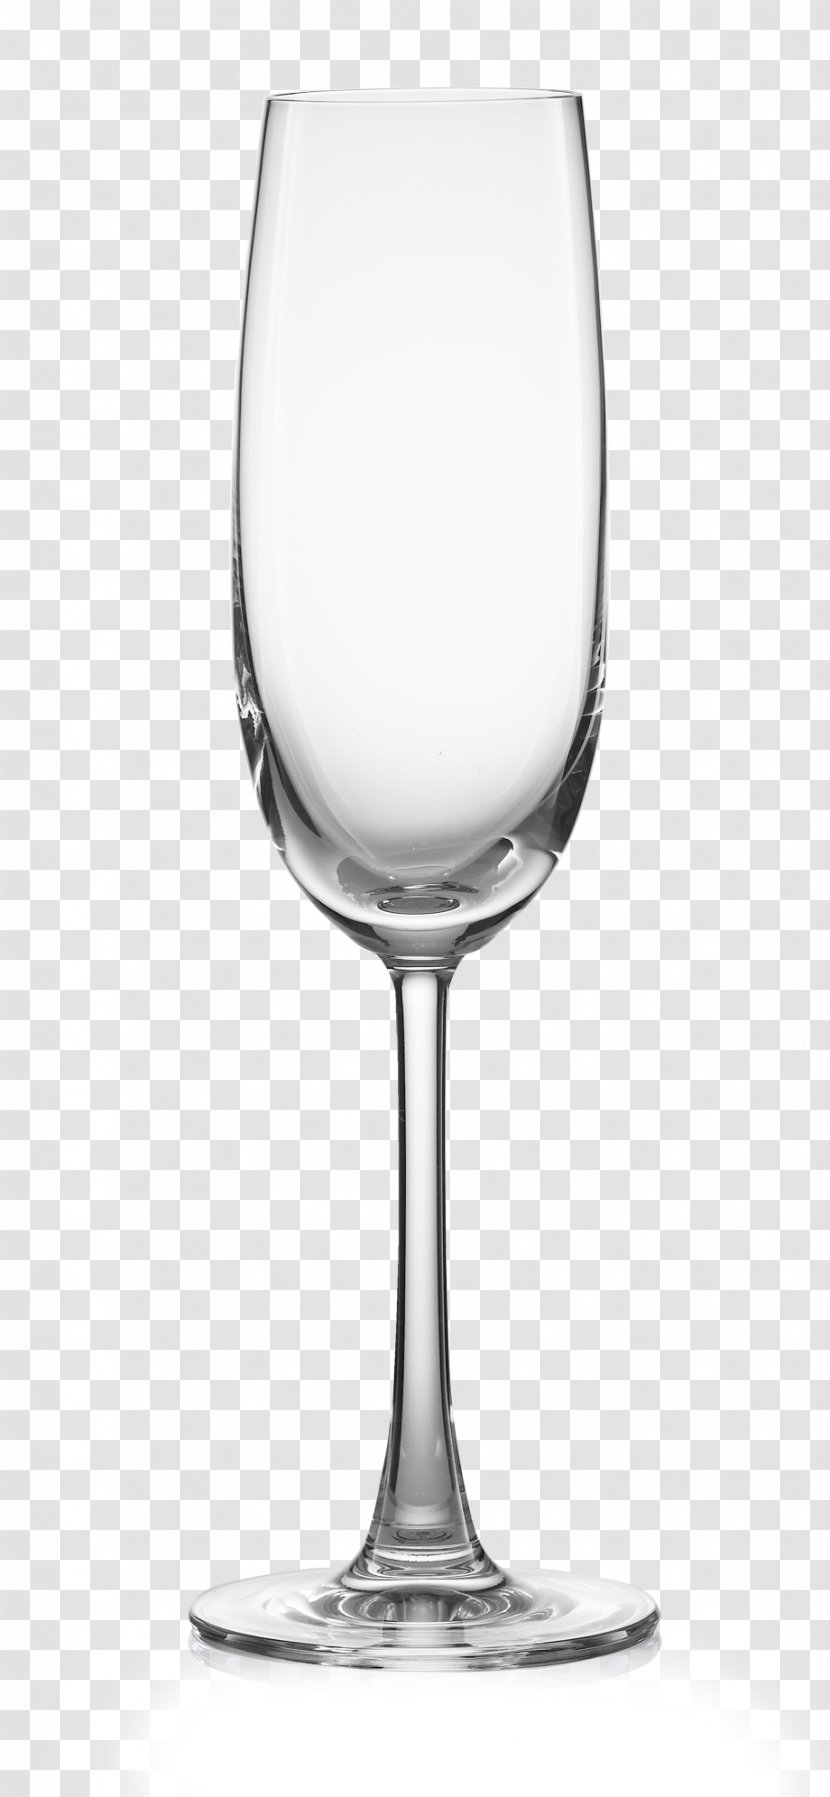 Whiskey Wine Cocktail Snifter Glencairn Whisky Glass - Drinkware - Champagne Transparent PNG